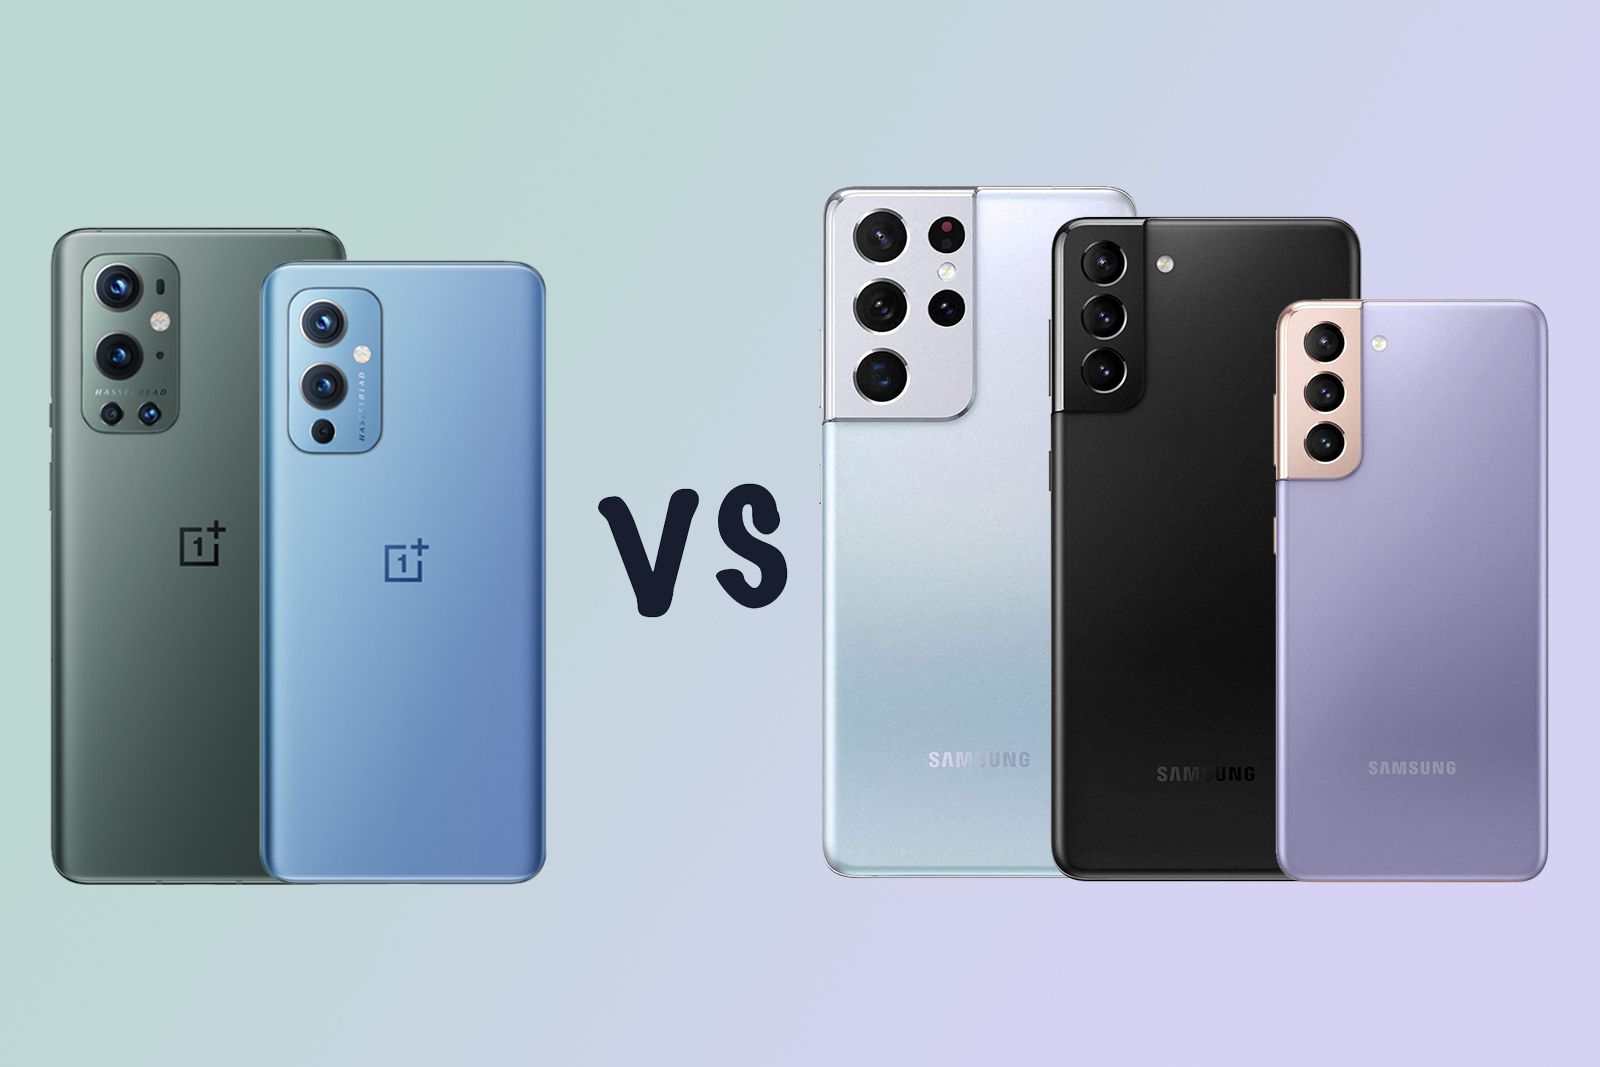 OnePlus 9 Pro vs Samsung Galaxy S21 Ultra: What's the difference? photo 1